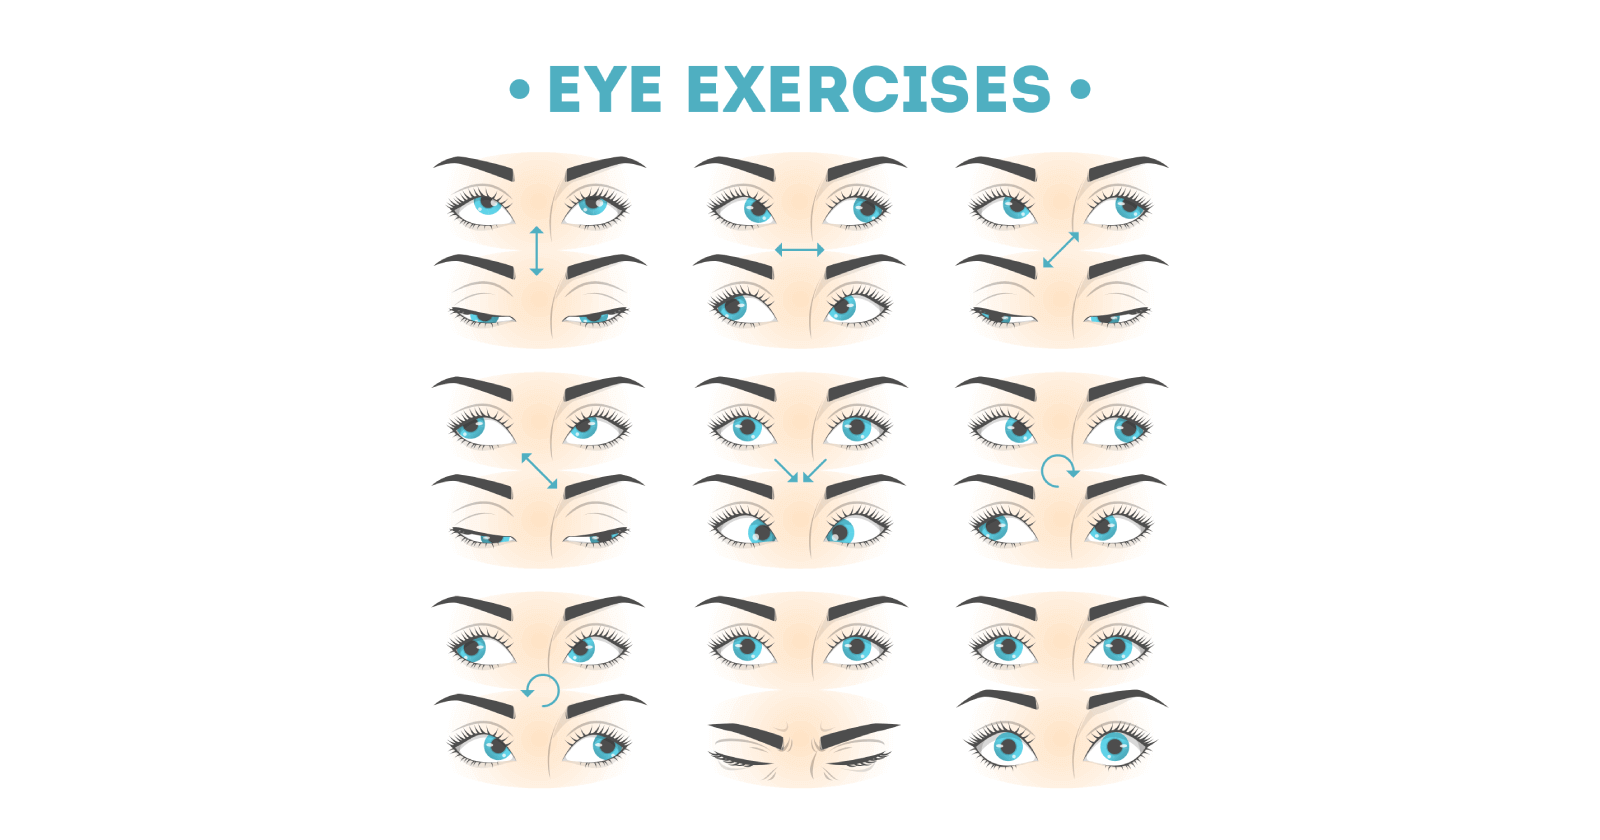 A workout for your eyes